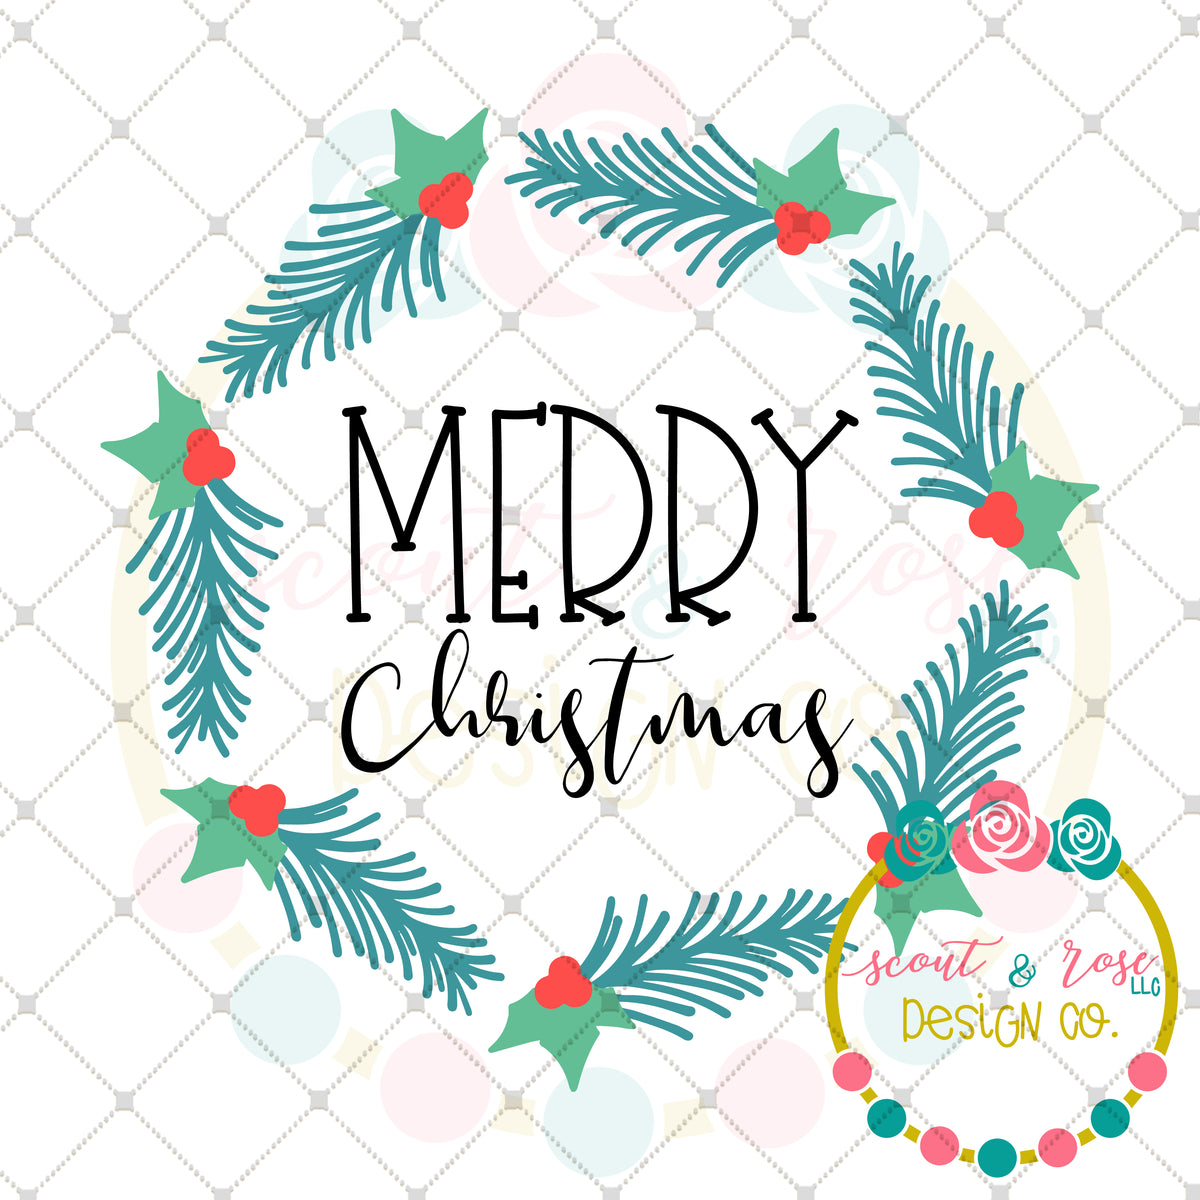 Download Merry Christmas Wreath SVG DXF PNG - Scout and Rose Design Co